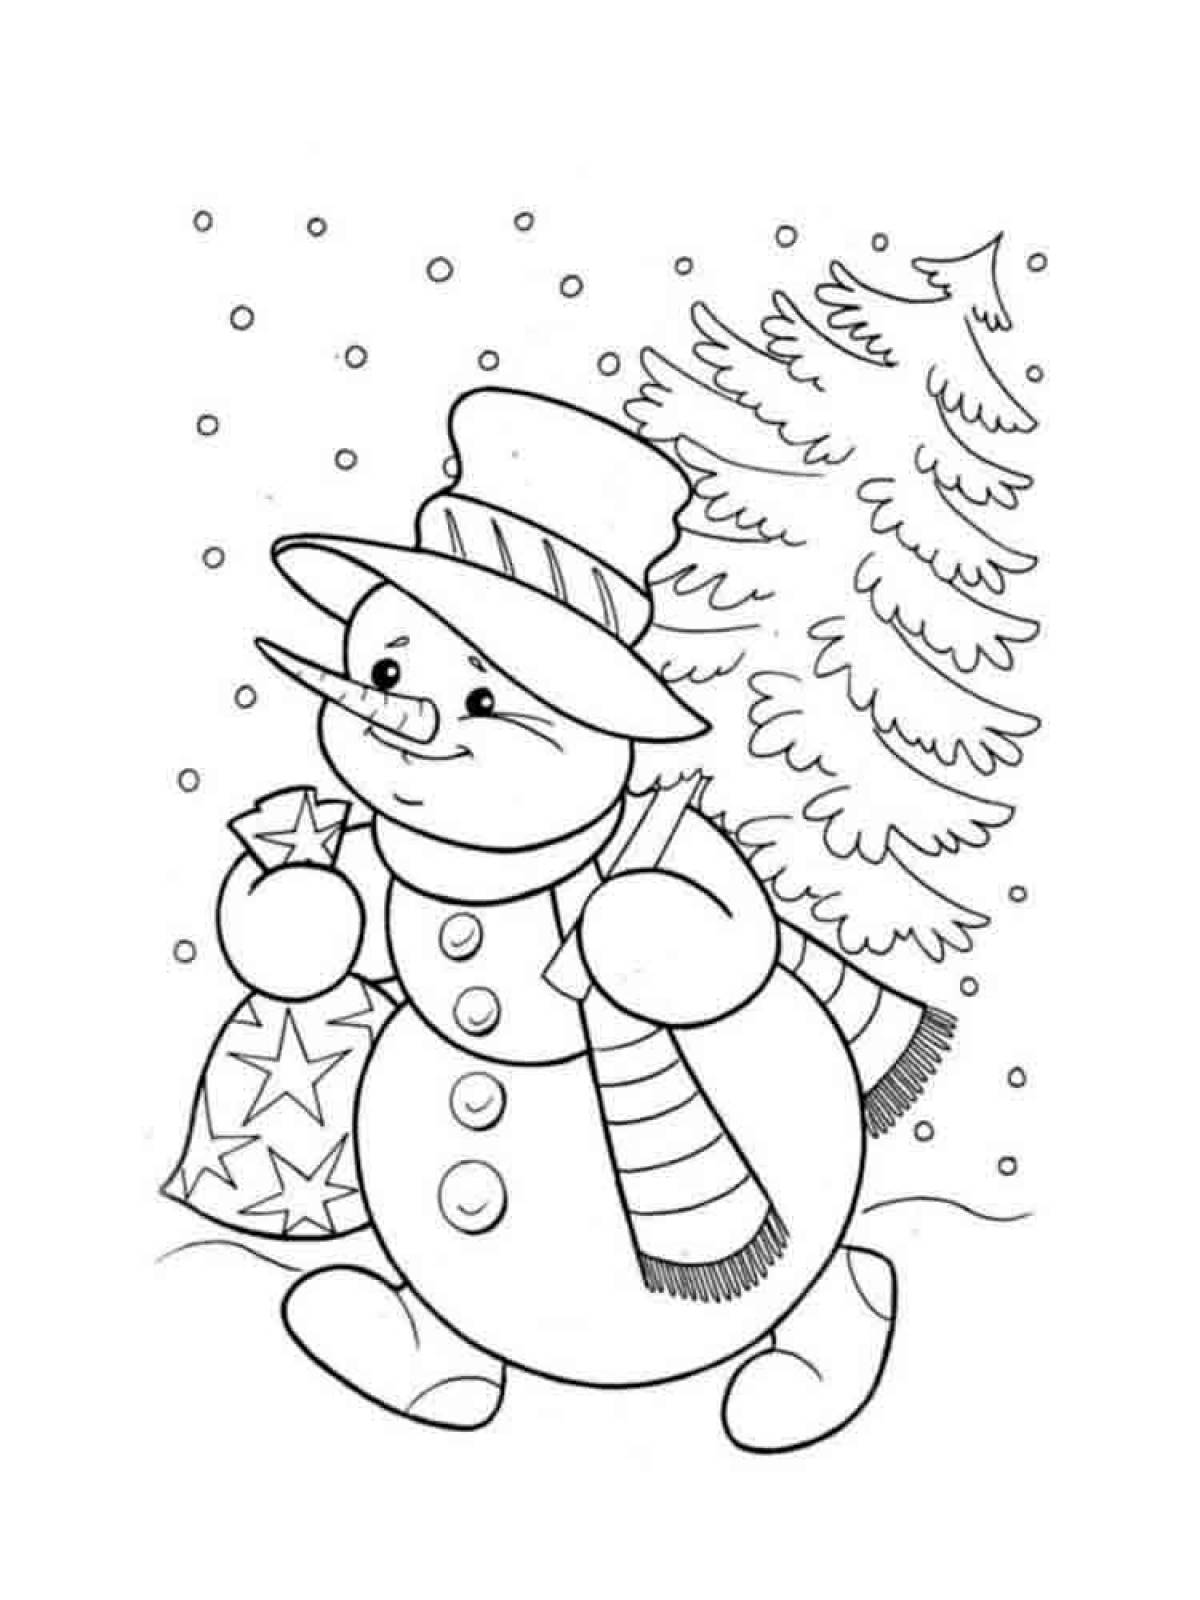 Snowman with a bag